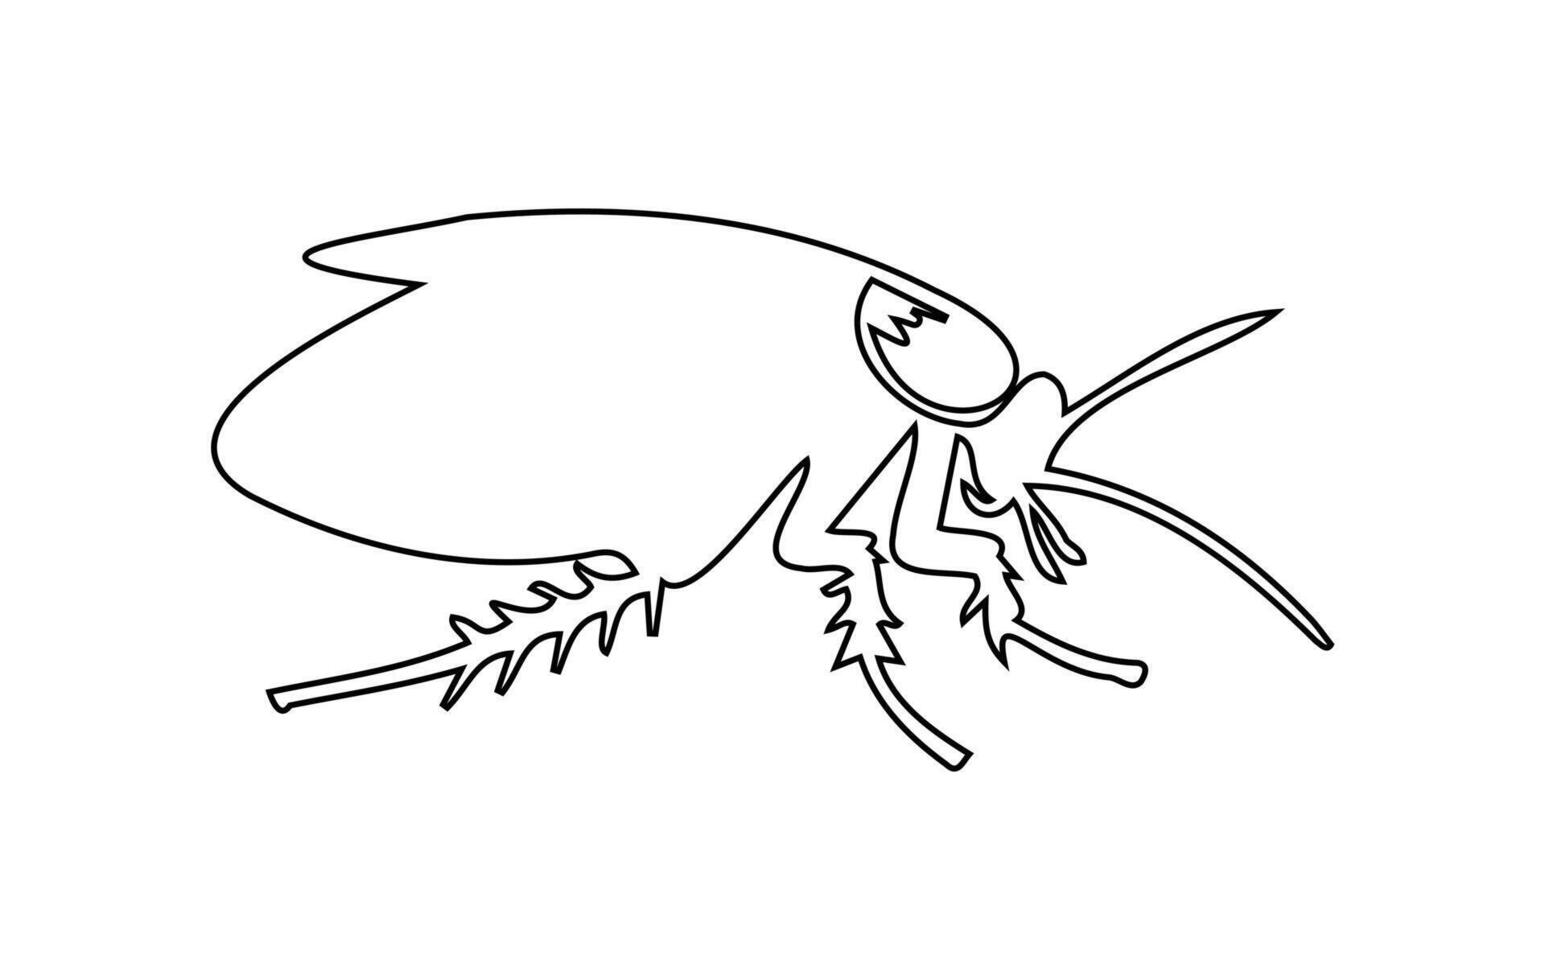 Black outline of cockroach on white background Illustration. Icon, sign, pictogram, print. Design element. Pest control and infestation concept for design, print and educational material vector